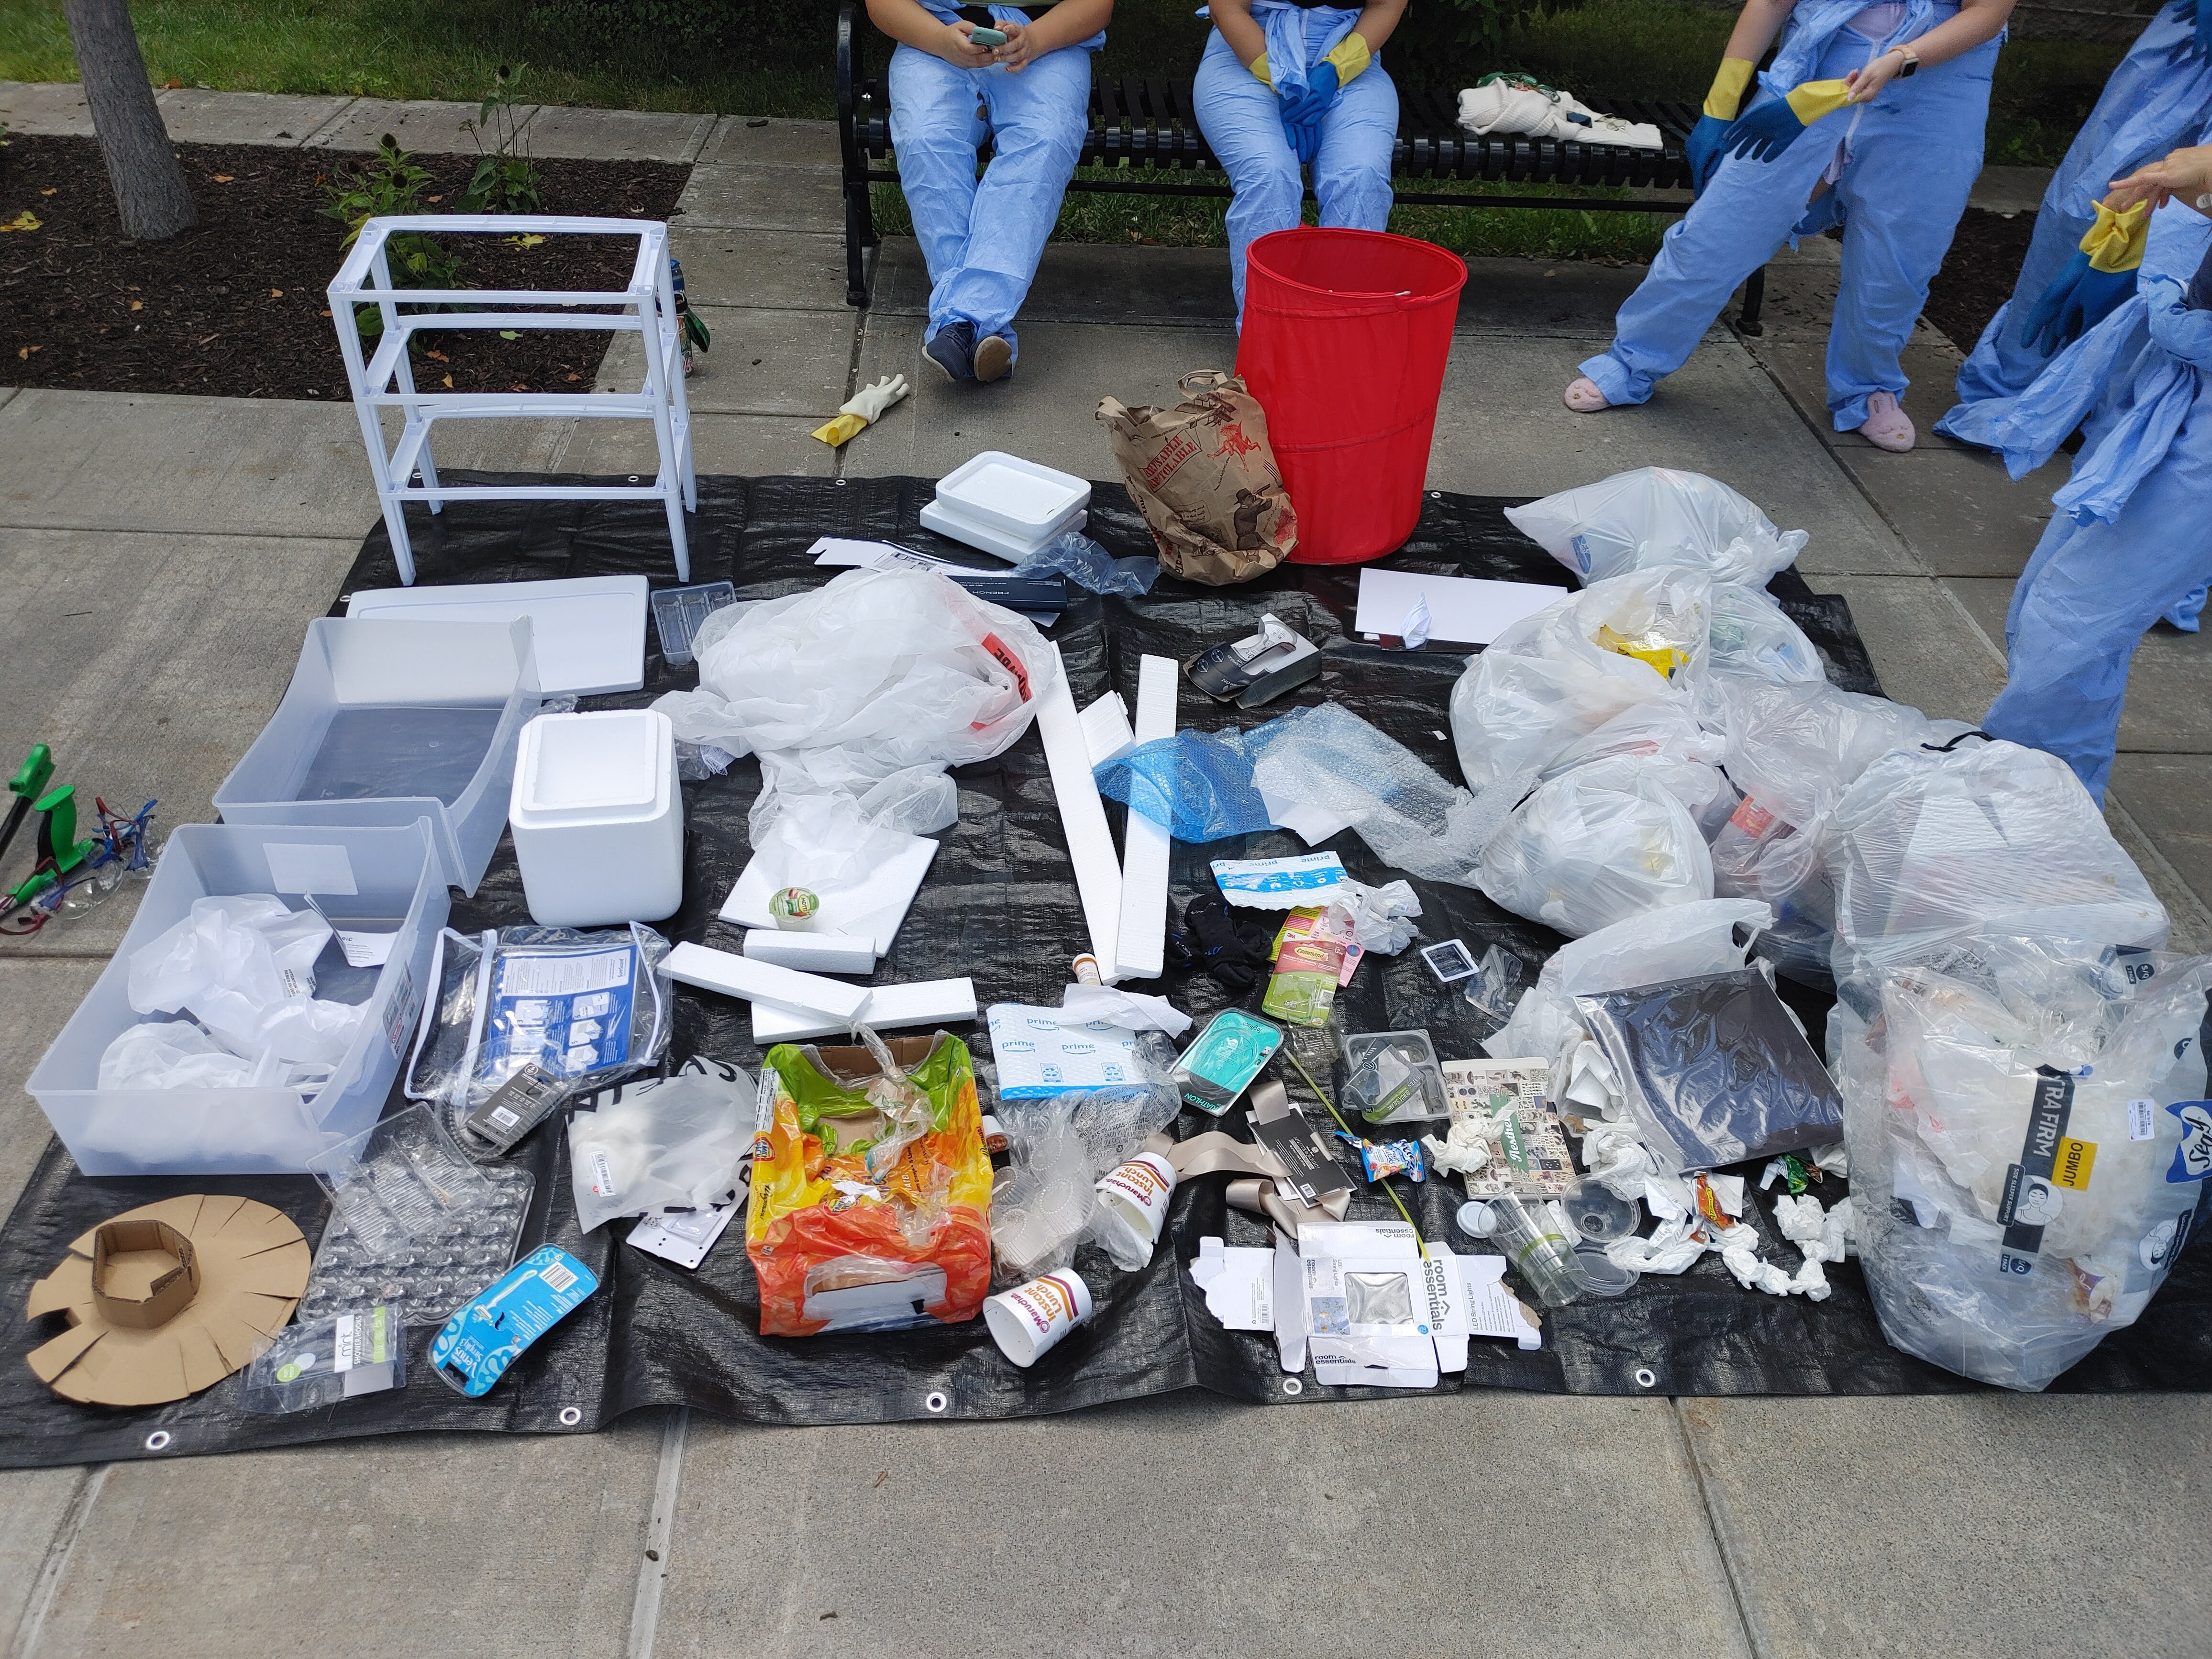 Items, mostly plastic, laid out on a tarp in a neat and orderly fashion